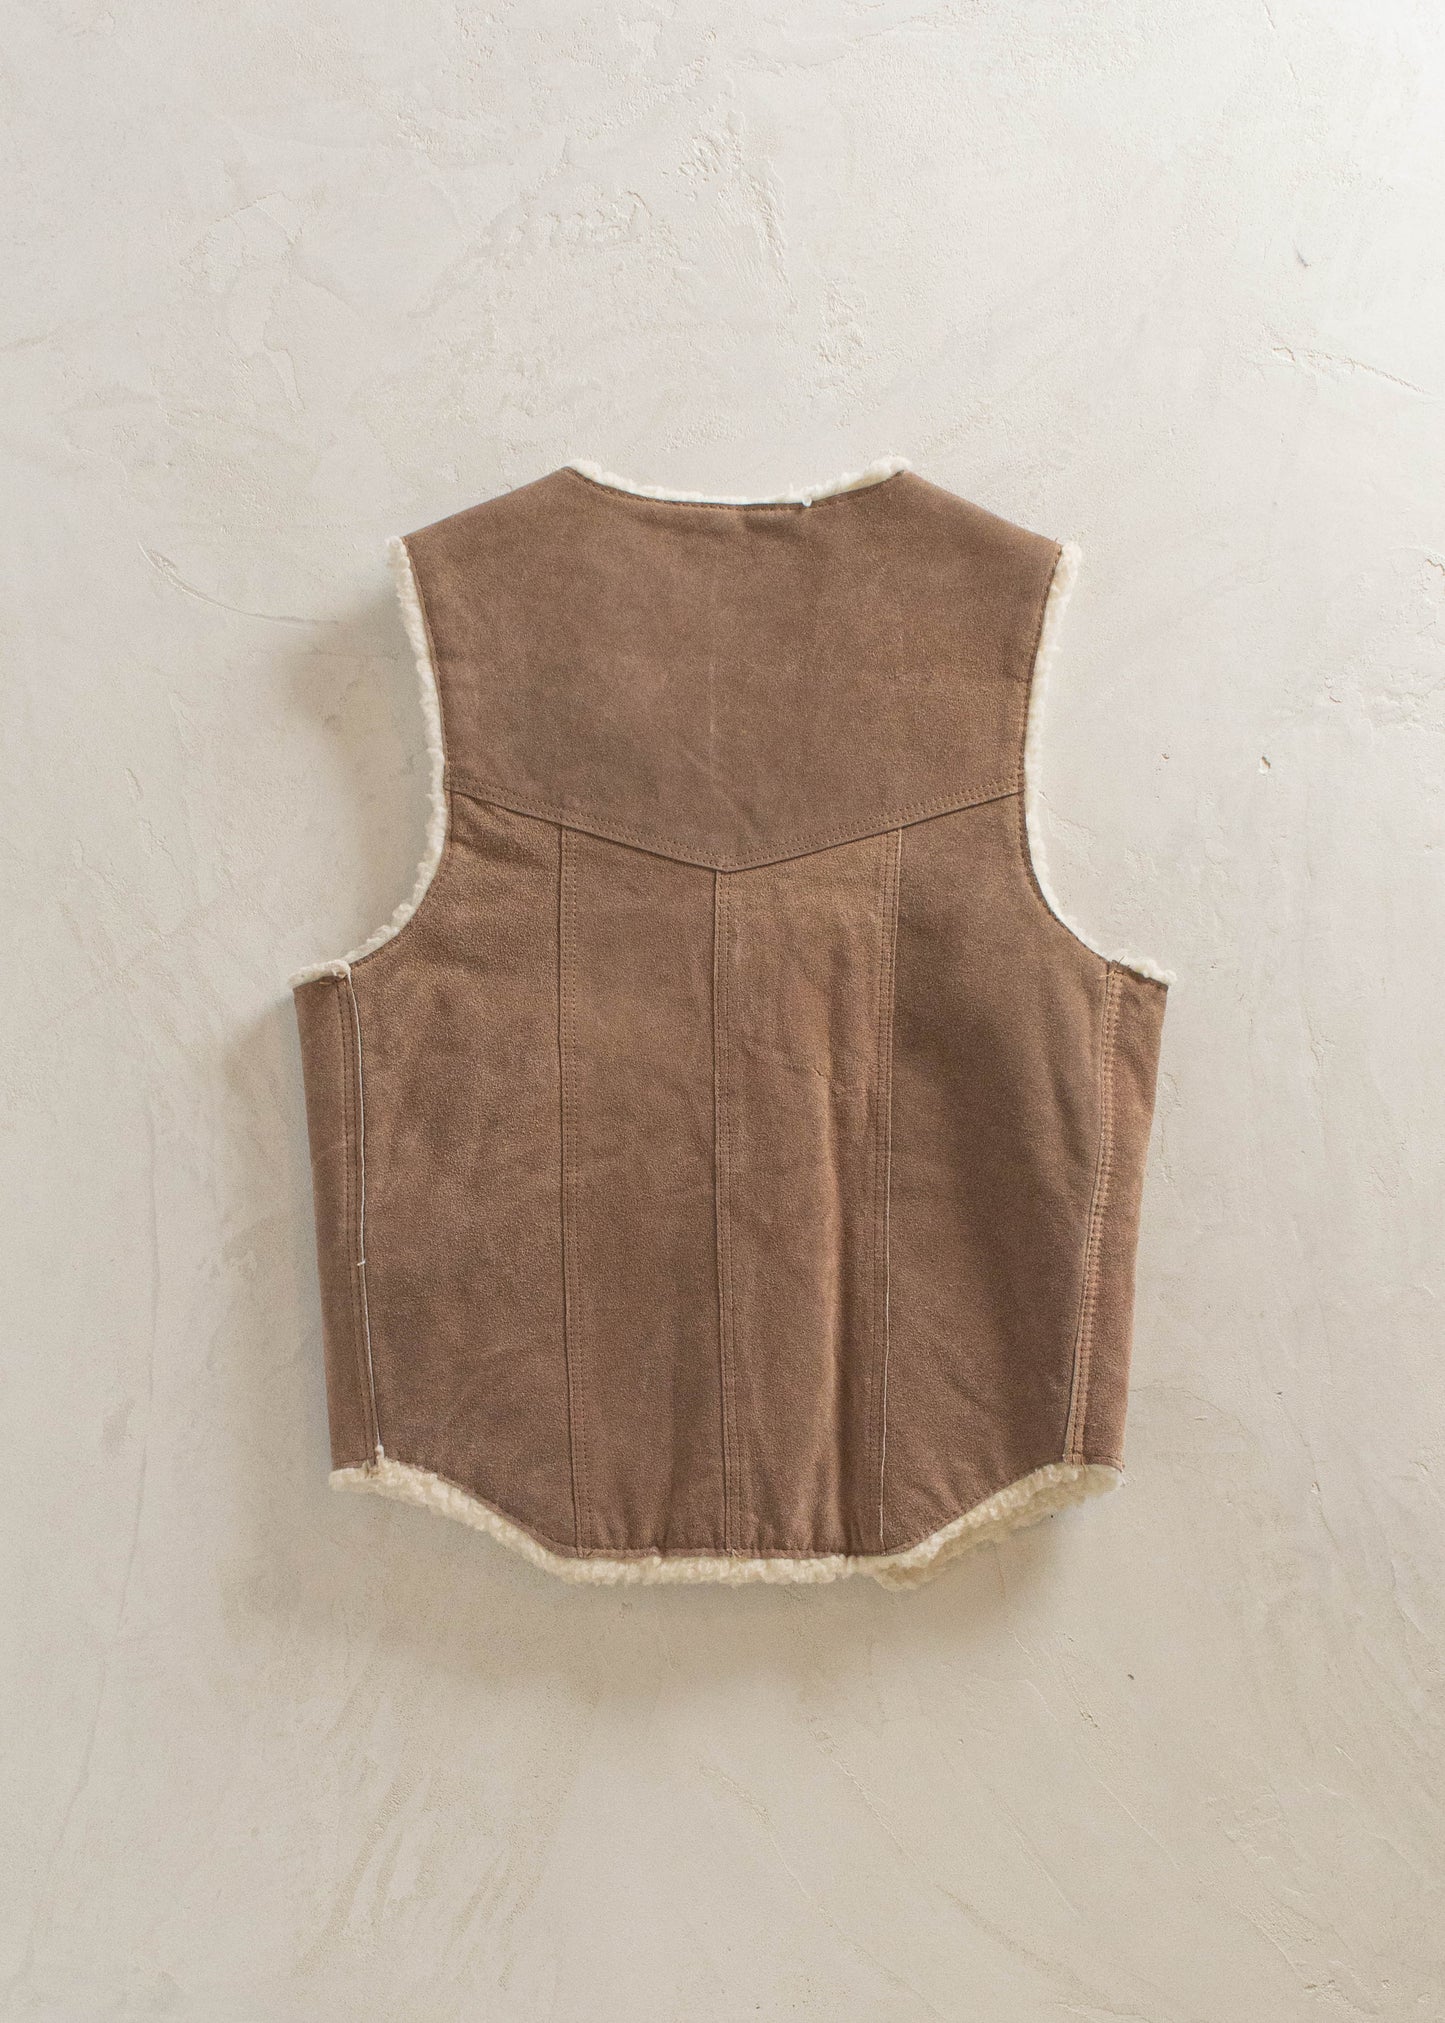 1970s Genuine Leather Suede Sherpa Lined Vest Size S/M